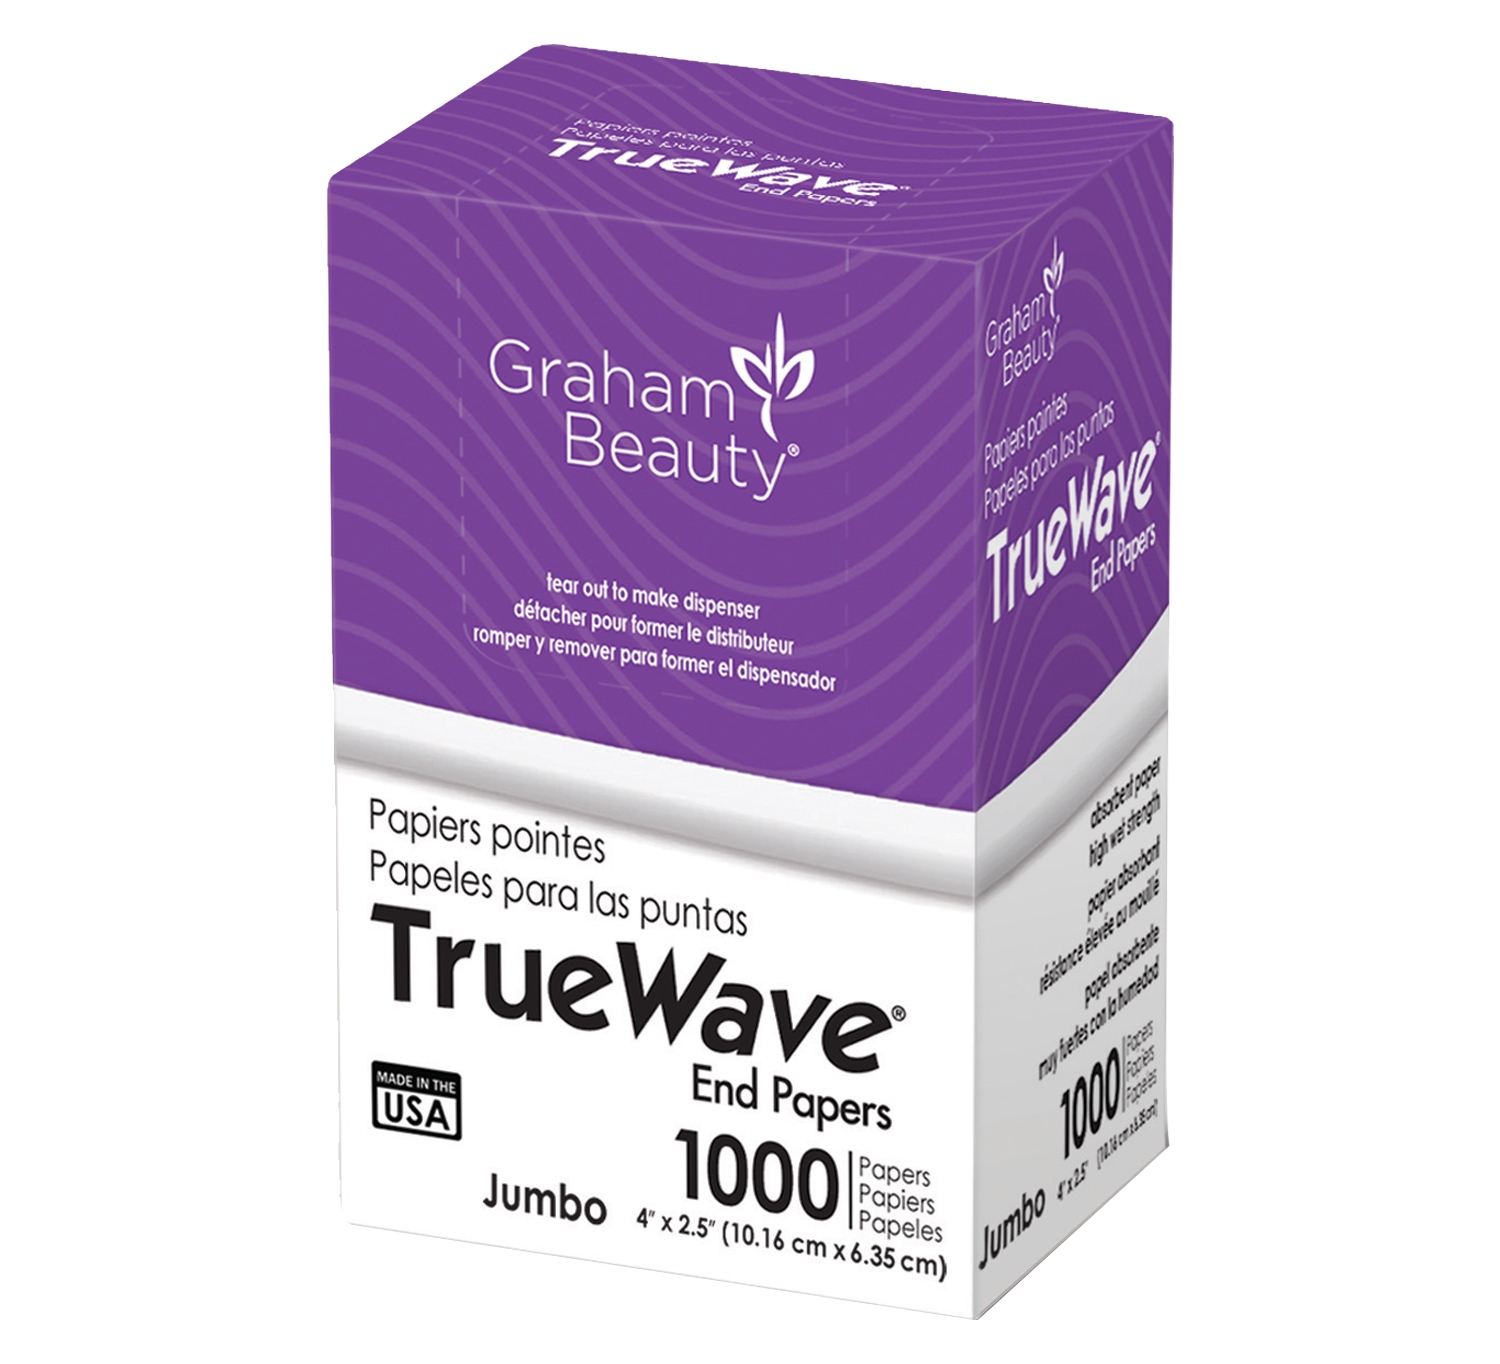 Graham Beauty TrueWave End Papers - 4 x 2.5 inches - 1000 ct